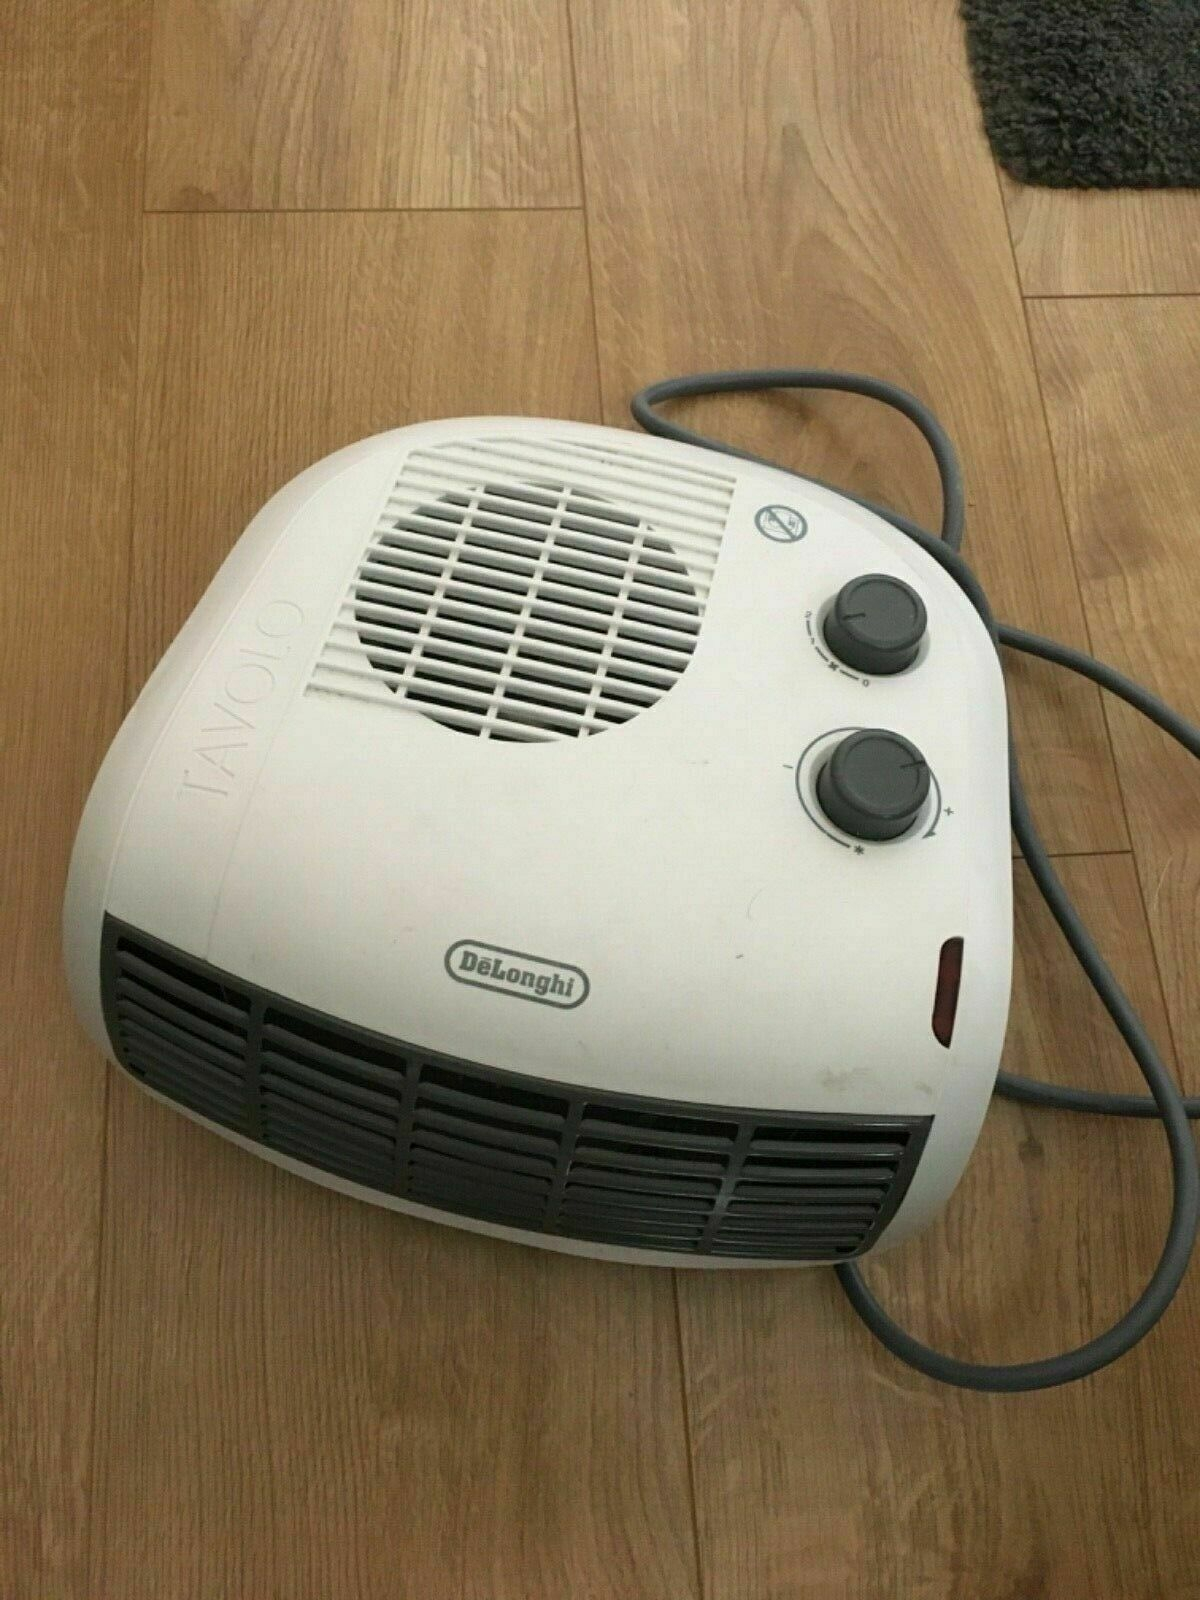 Delonghi Htf 3033 Electric Compact Heater in dimensions 1200 X 1600